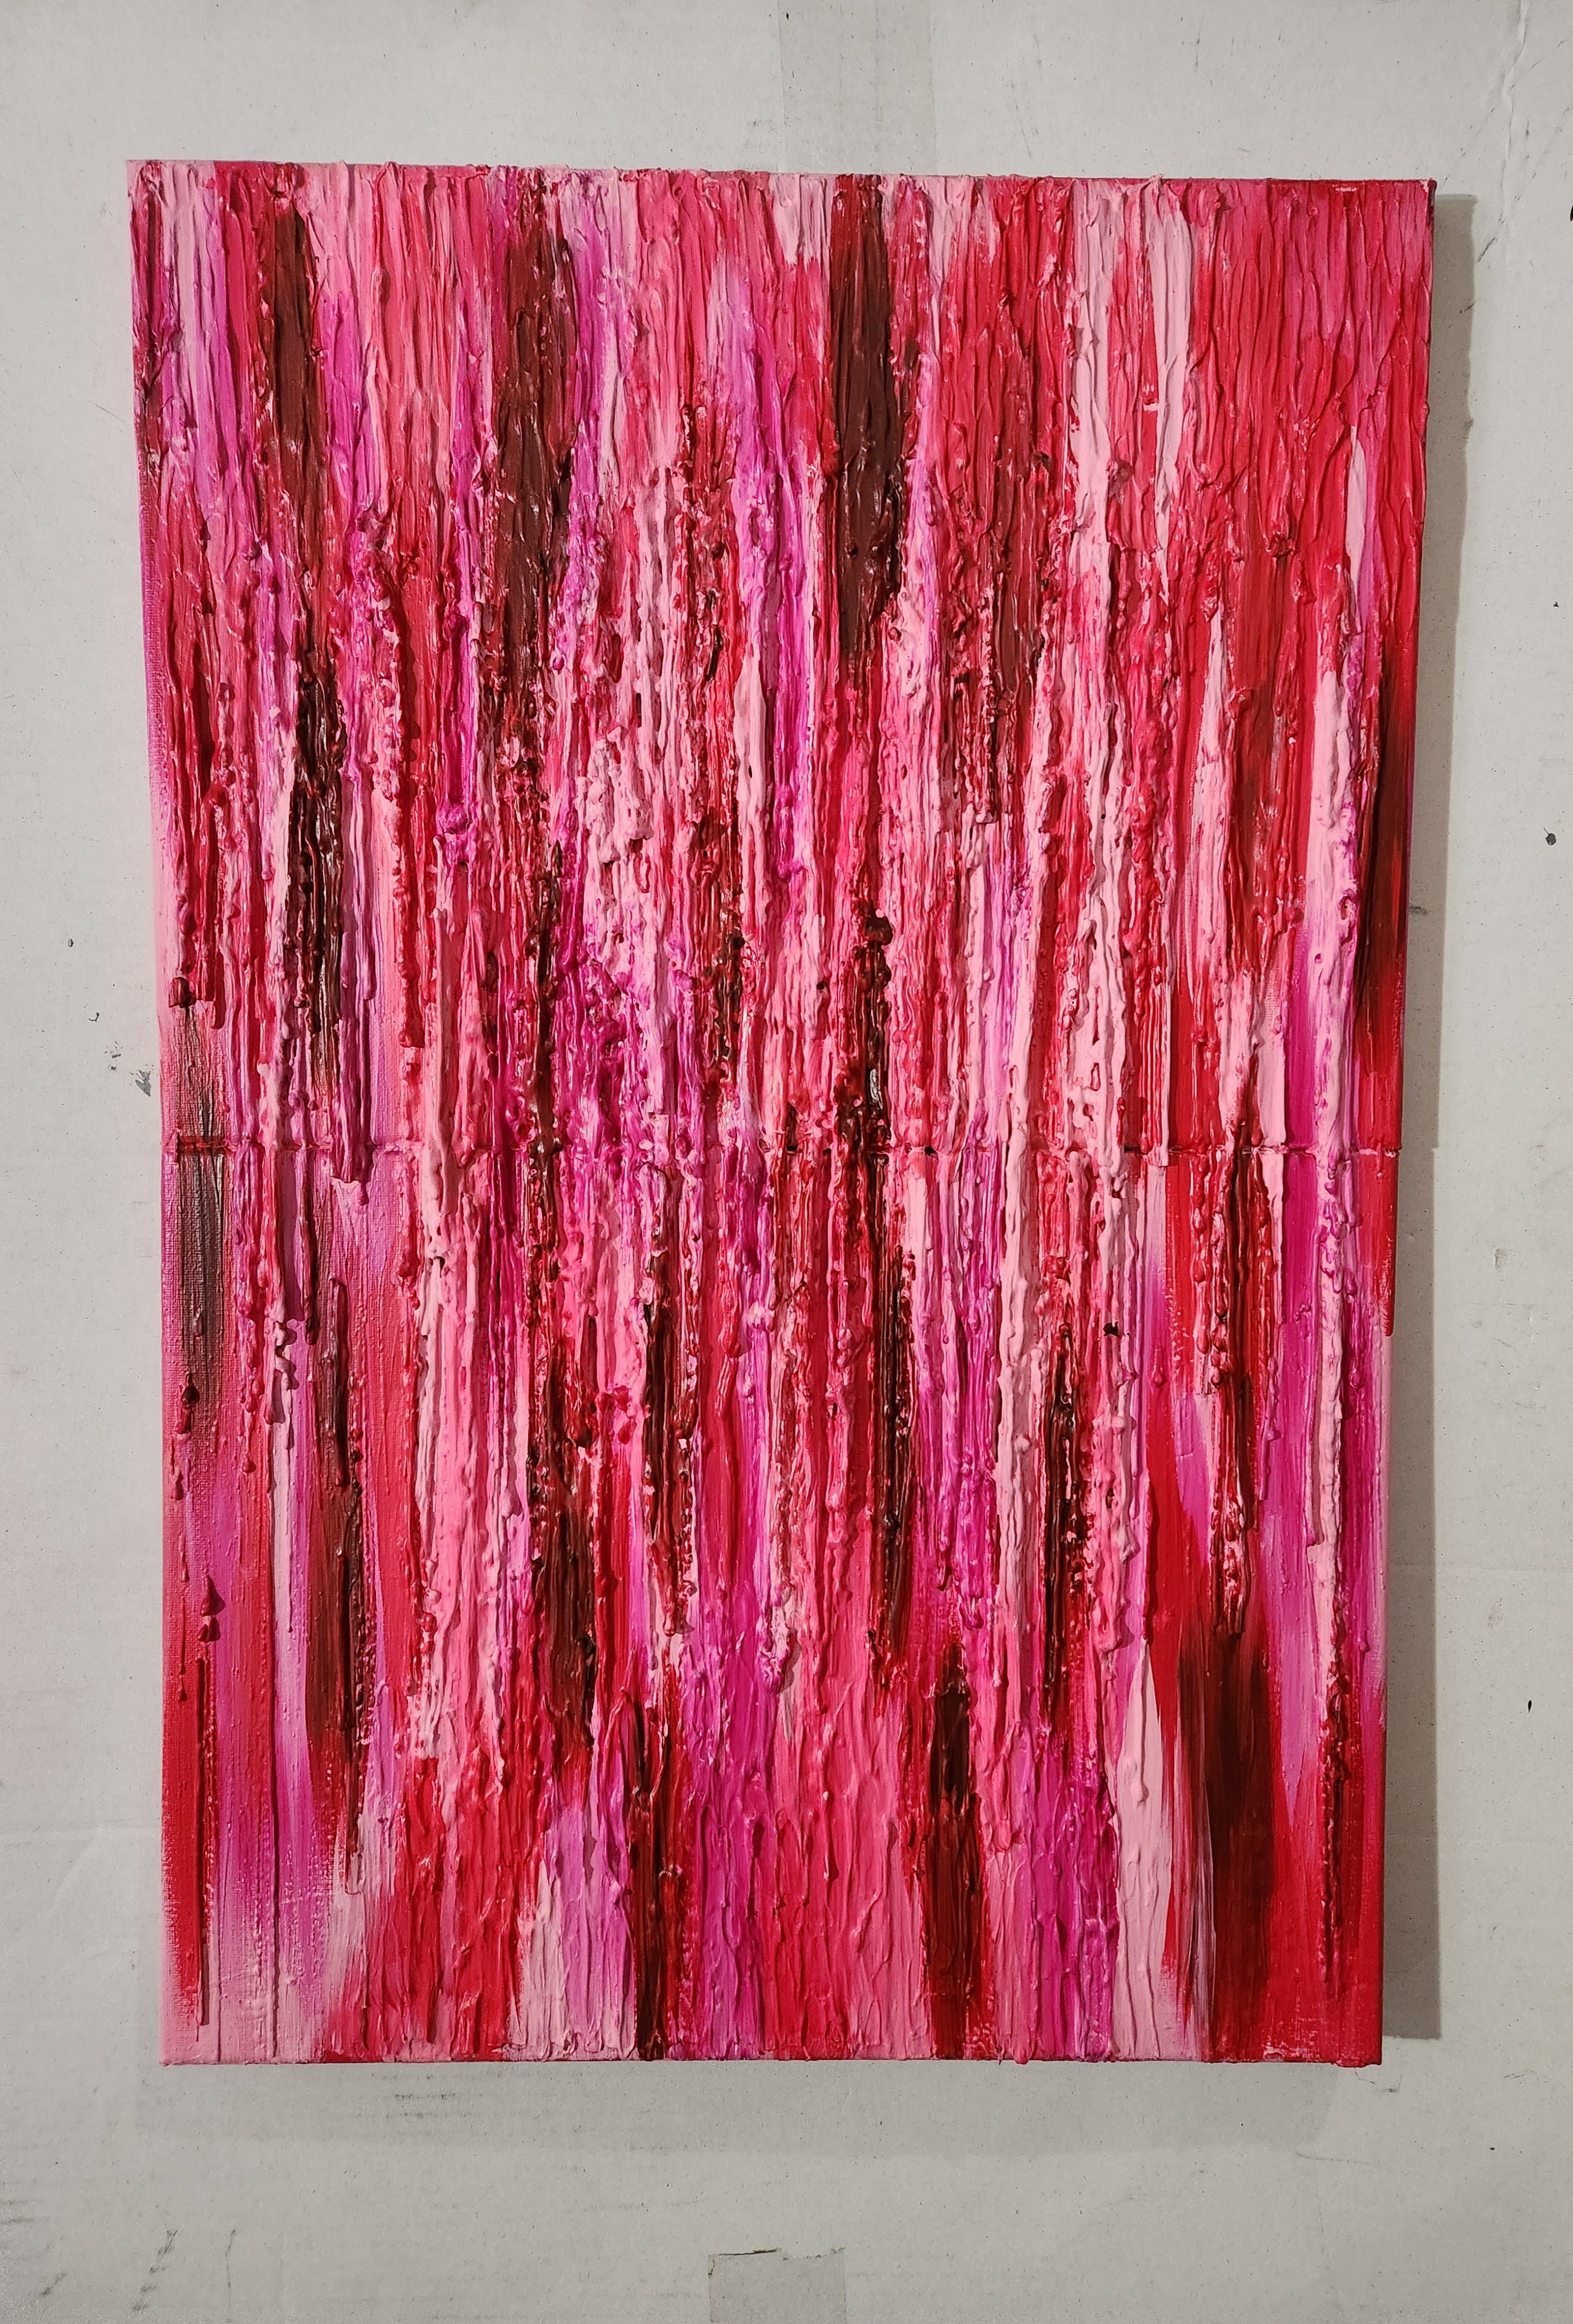 'RED MELTING' Acrylic, Crayon, and Mixed Media on Canvas